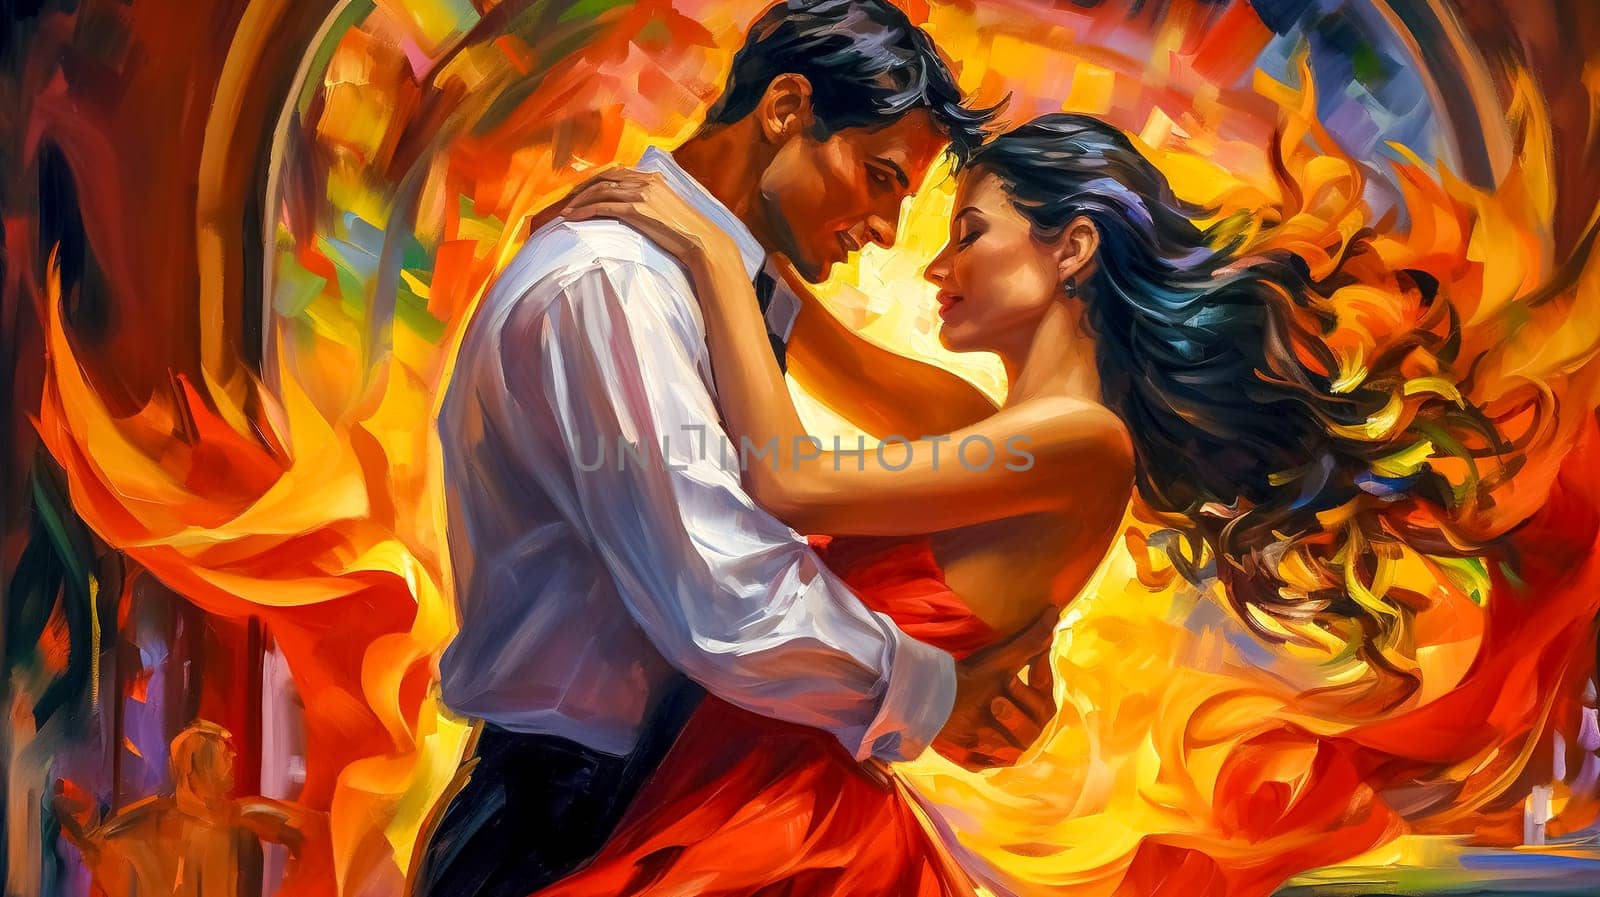 expressive painting of a couple engaged in a passionate Latin dance, their bodies moving rhythmically against a backdrop that swirls with fiery colors, suggesting the intense energy their performance by Edophoto